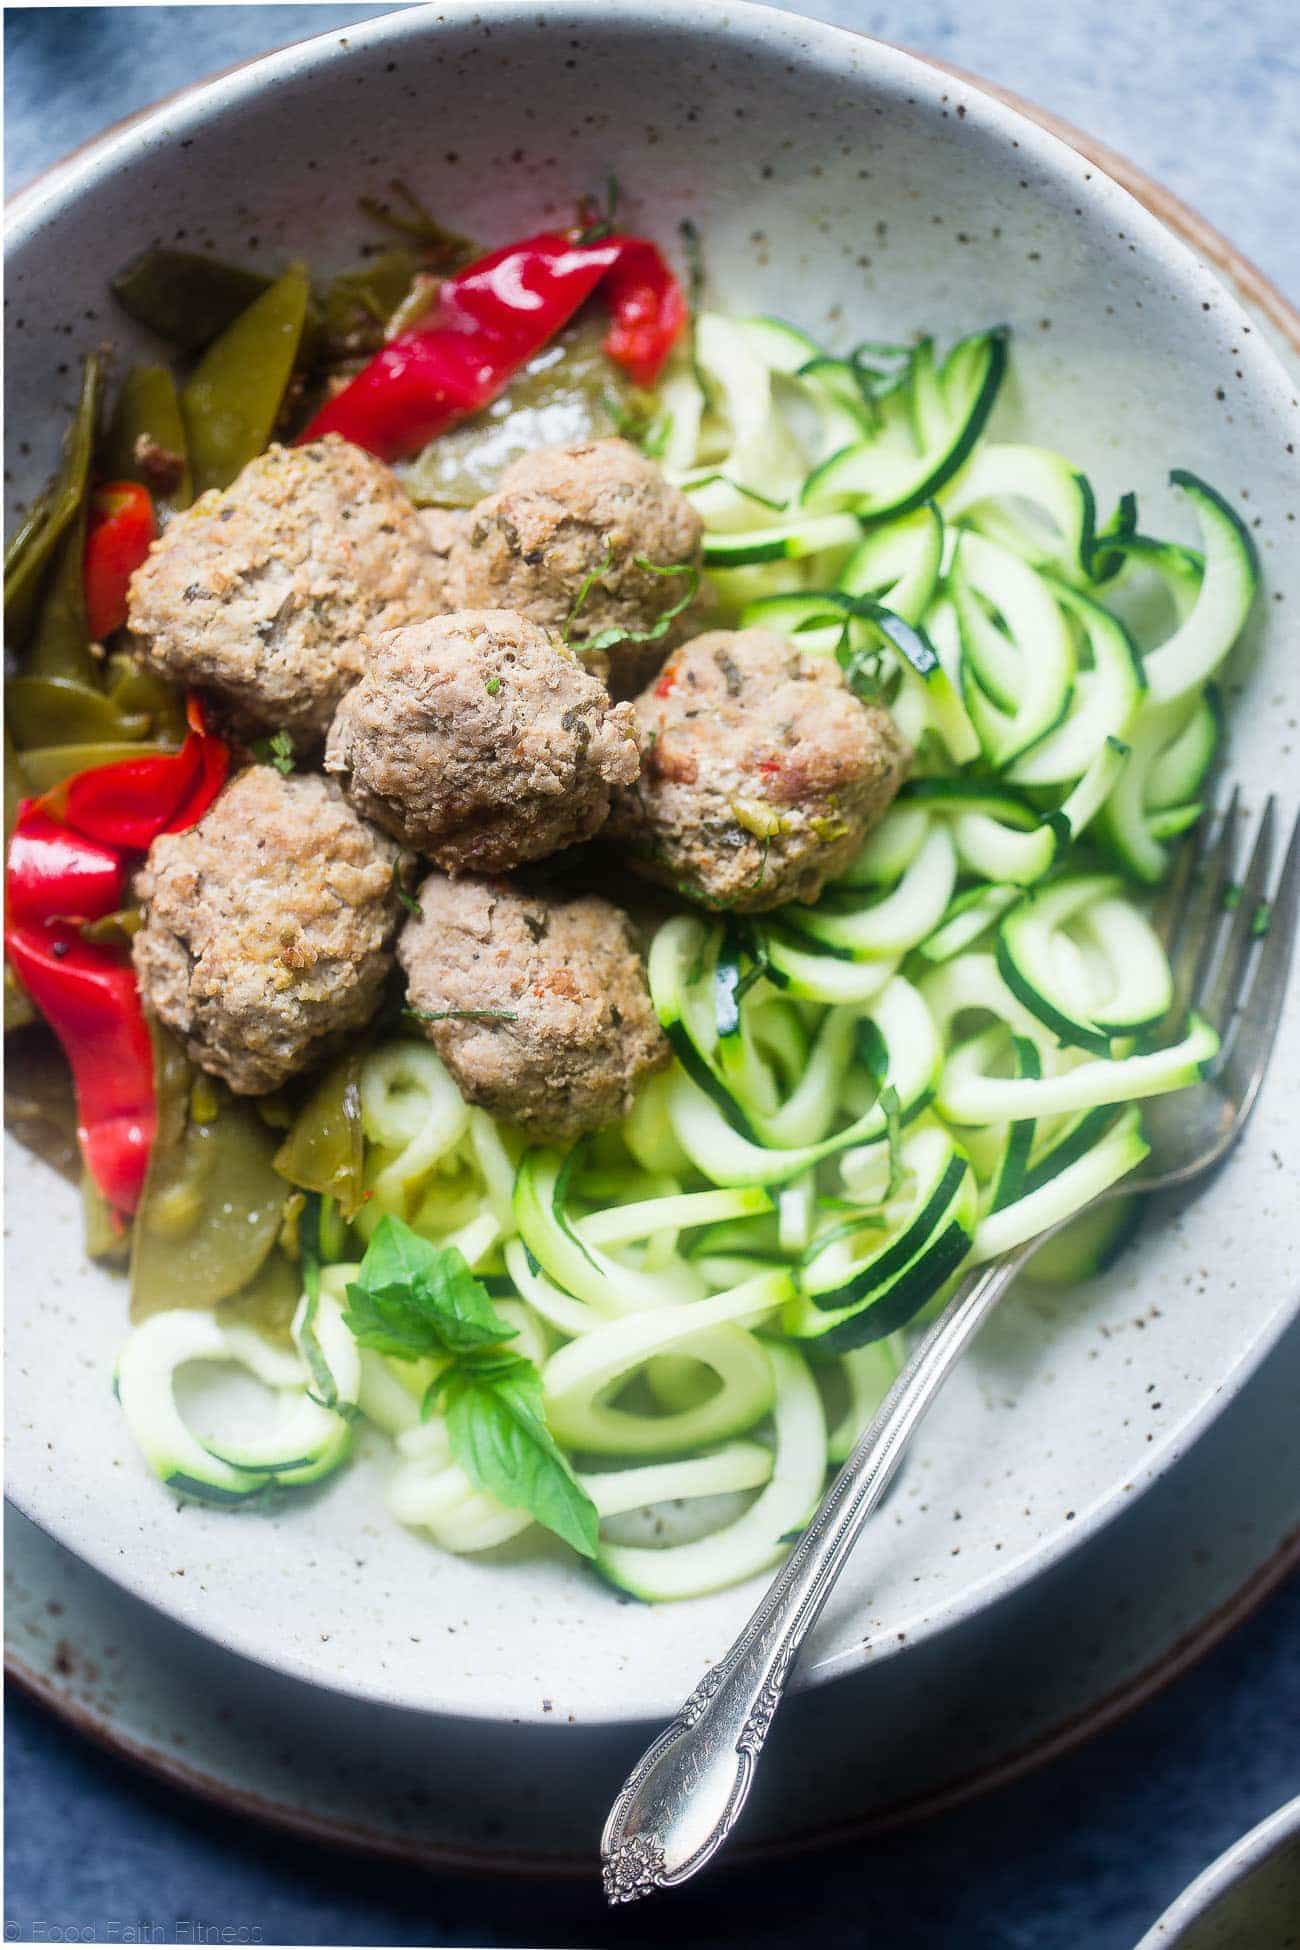 Easy Paleo Italian Meatballs in the Instant Pot - This low carb paleo meatball recipe tastes like pasta primavera! They're a healthy, gluten free and paleo spring meal for only 300 calories! | Foodfaithfitness.com | @FoodFaithFit